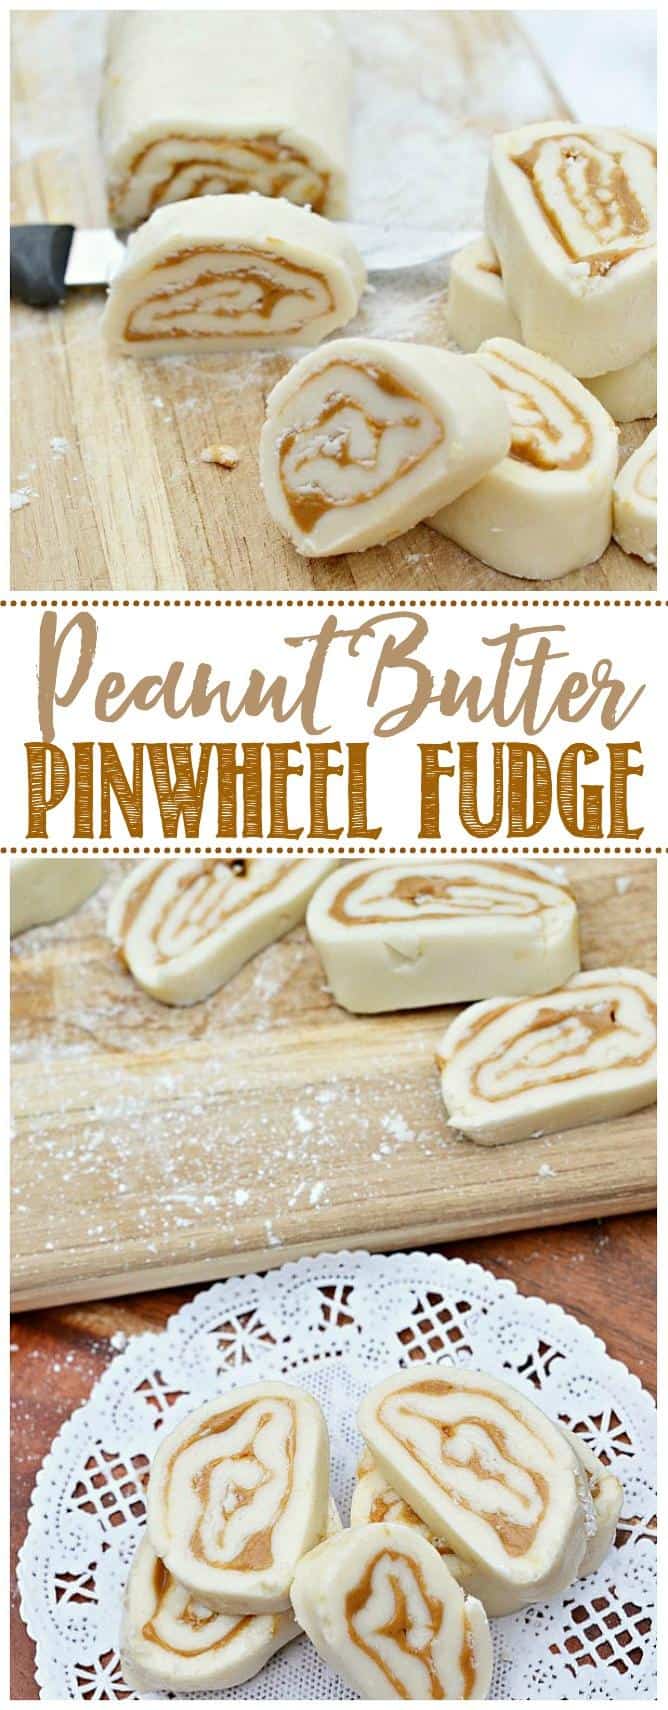  The perfect treat for peanut butter lovers.